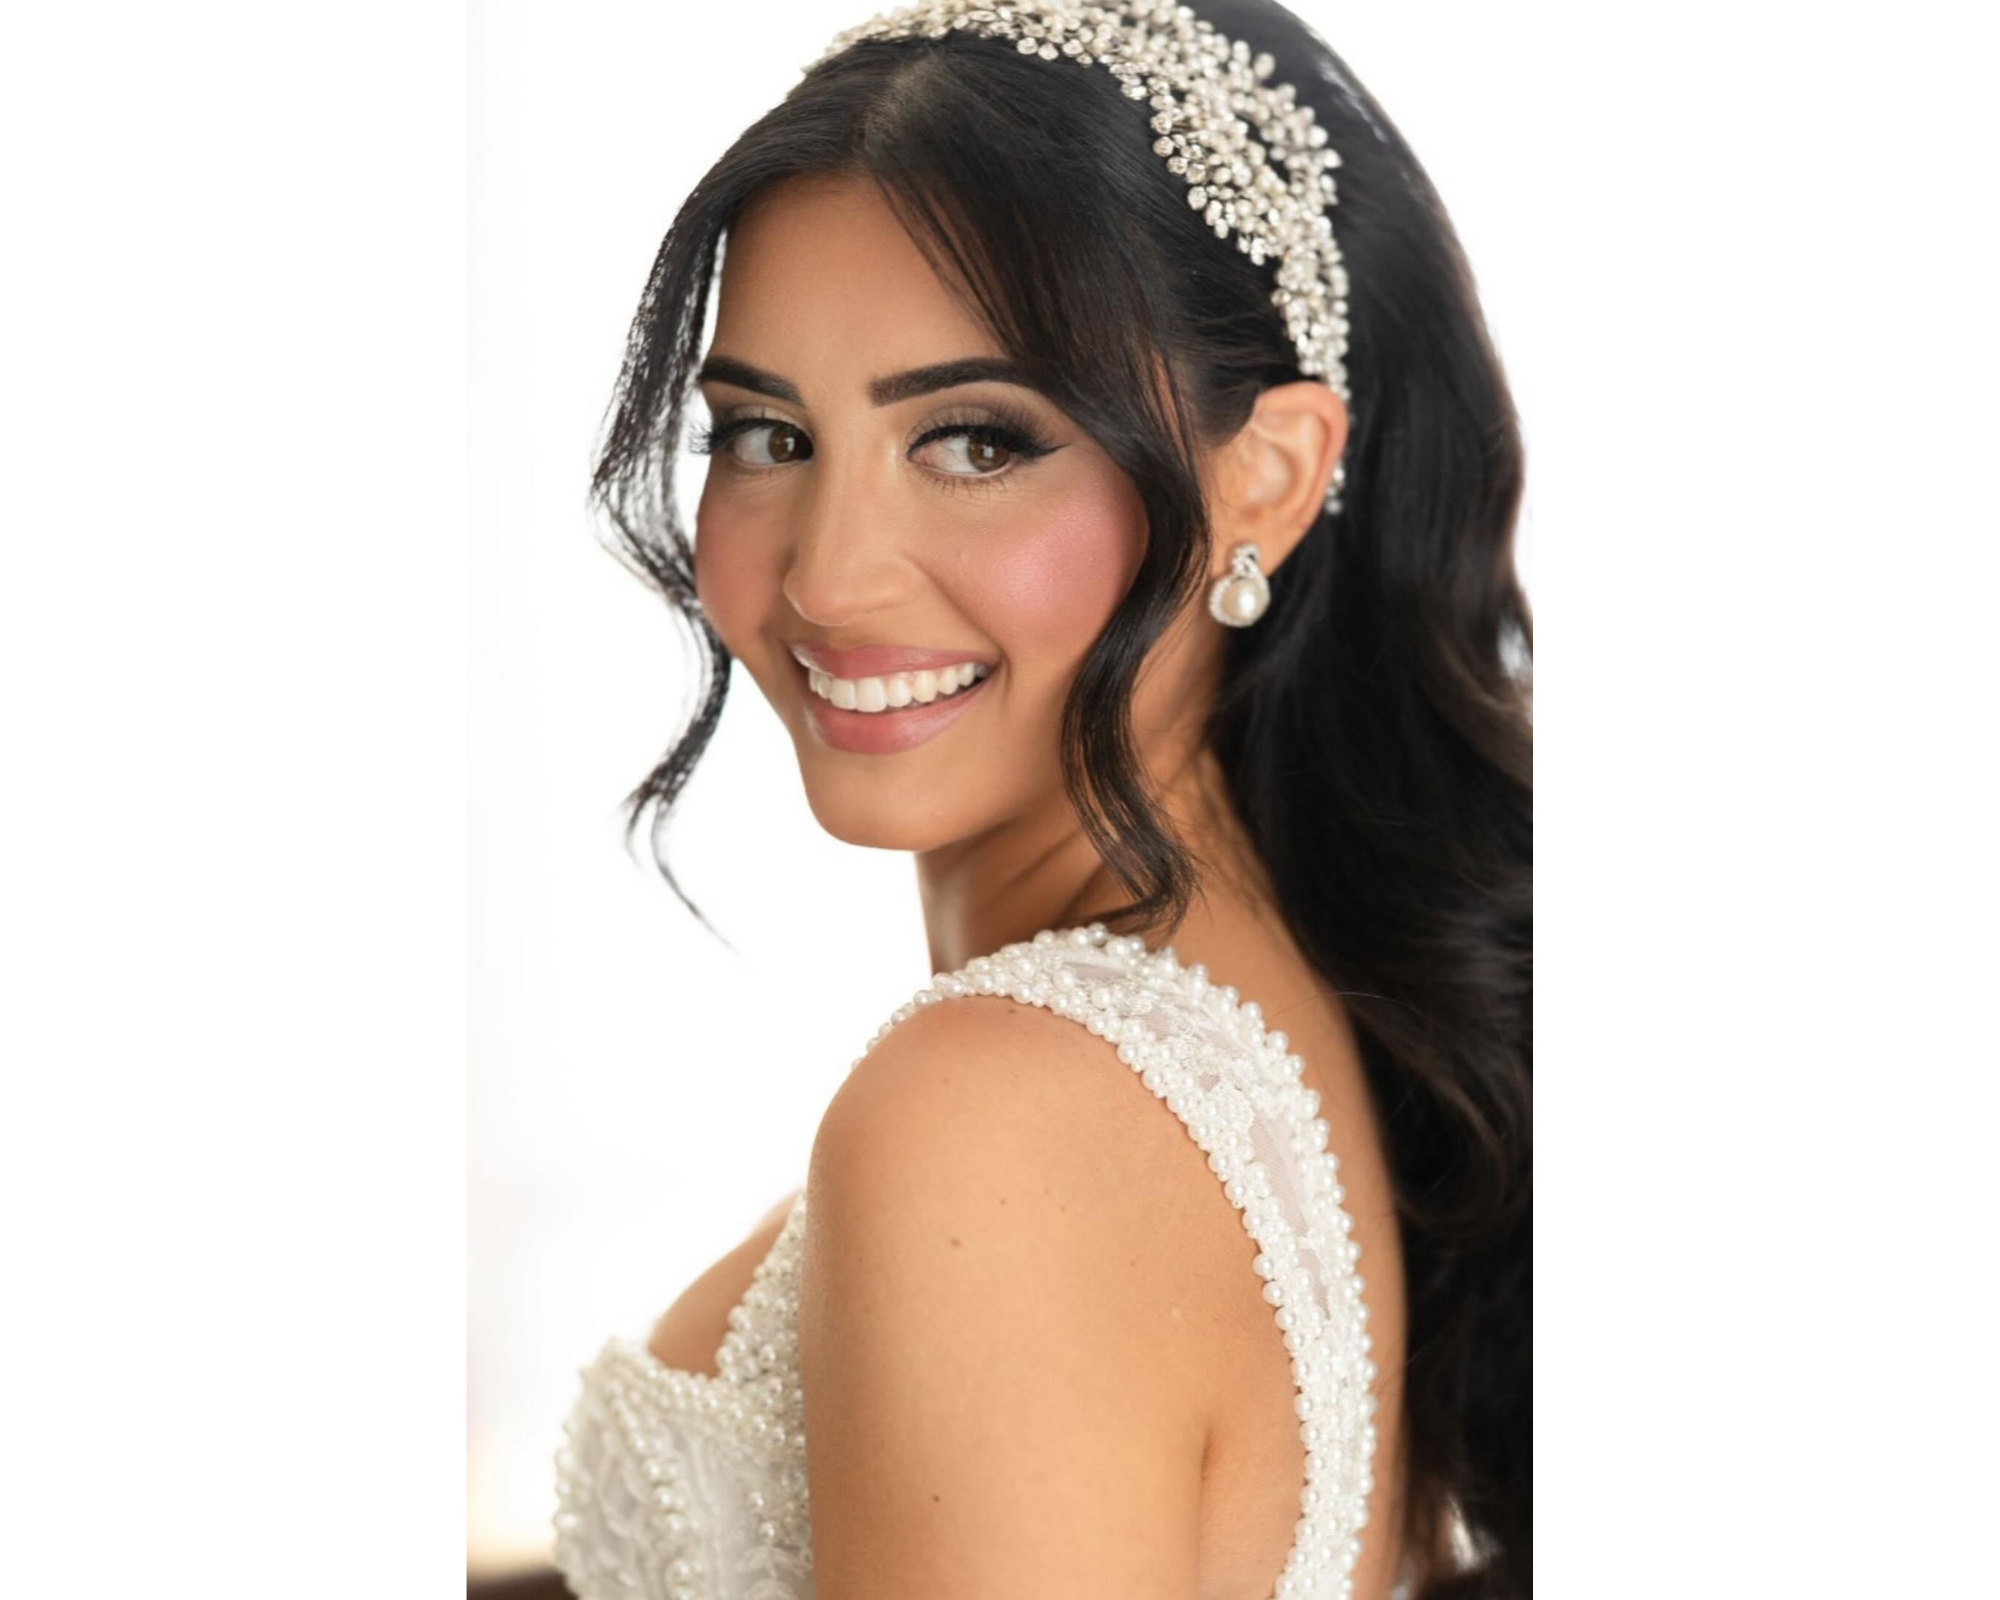 Our happy bride modeling her custom freshwater pearl and crystal hair vine headband